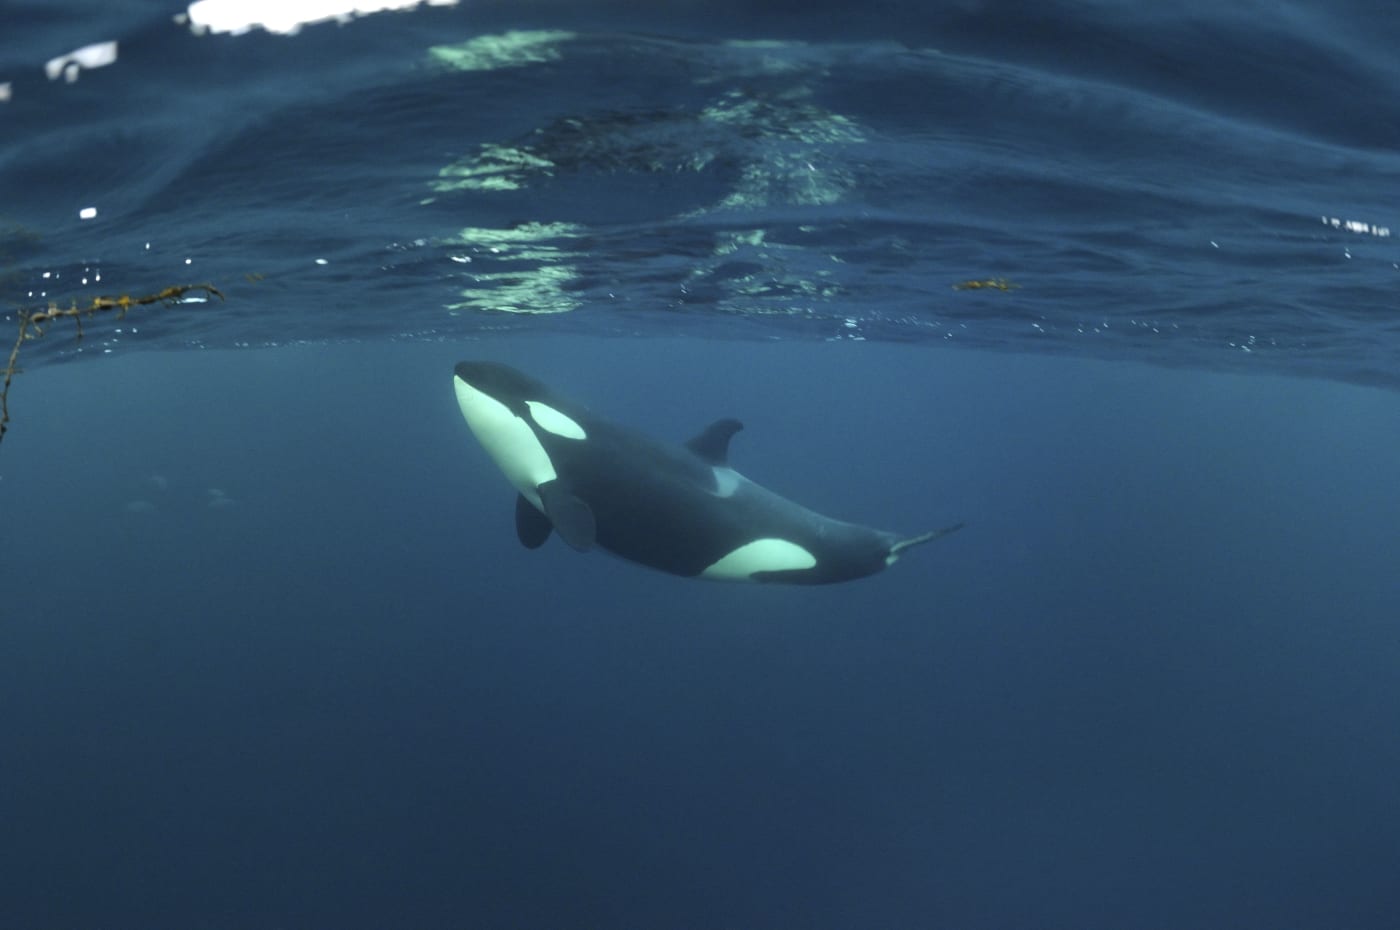 Killer whale / Orca (Orcinus orca) just below the surface, Kristiansund, Nordmore, Norway.